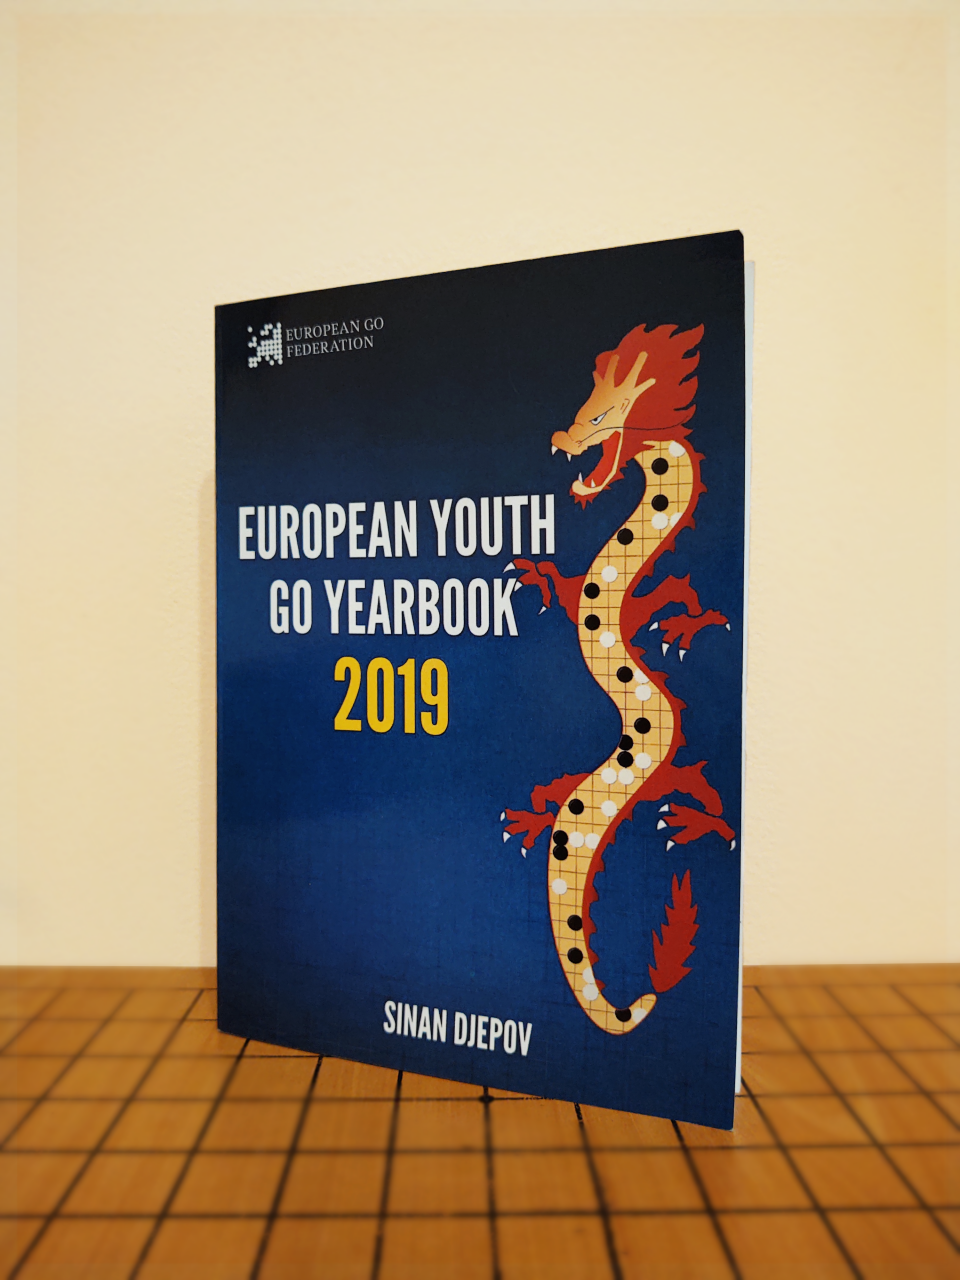 European Youth Go Yearbook 2019